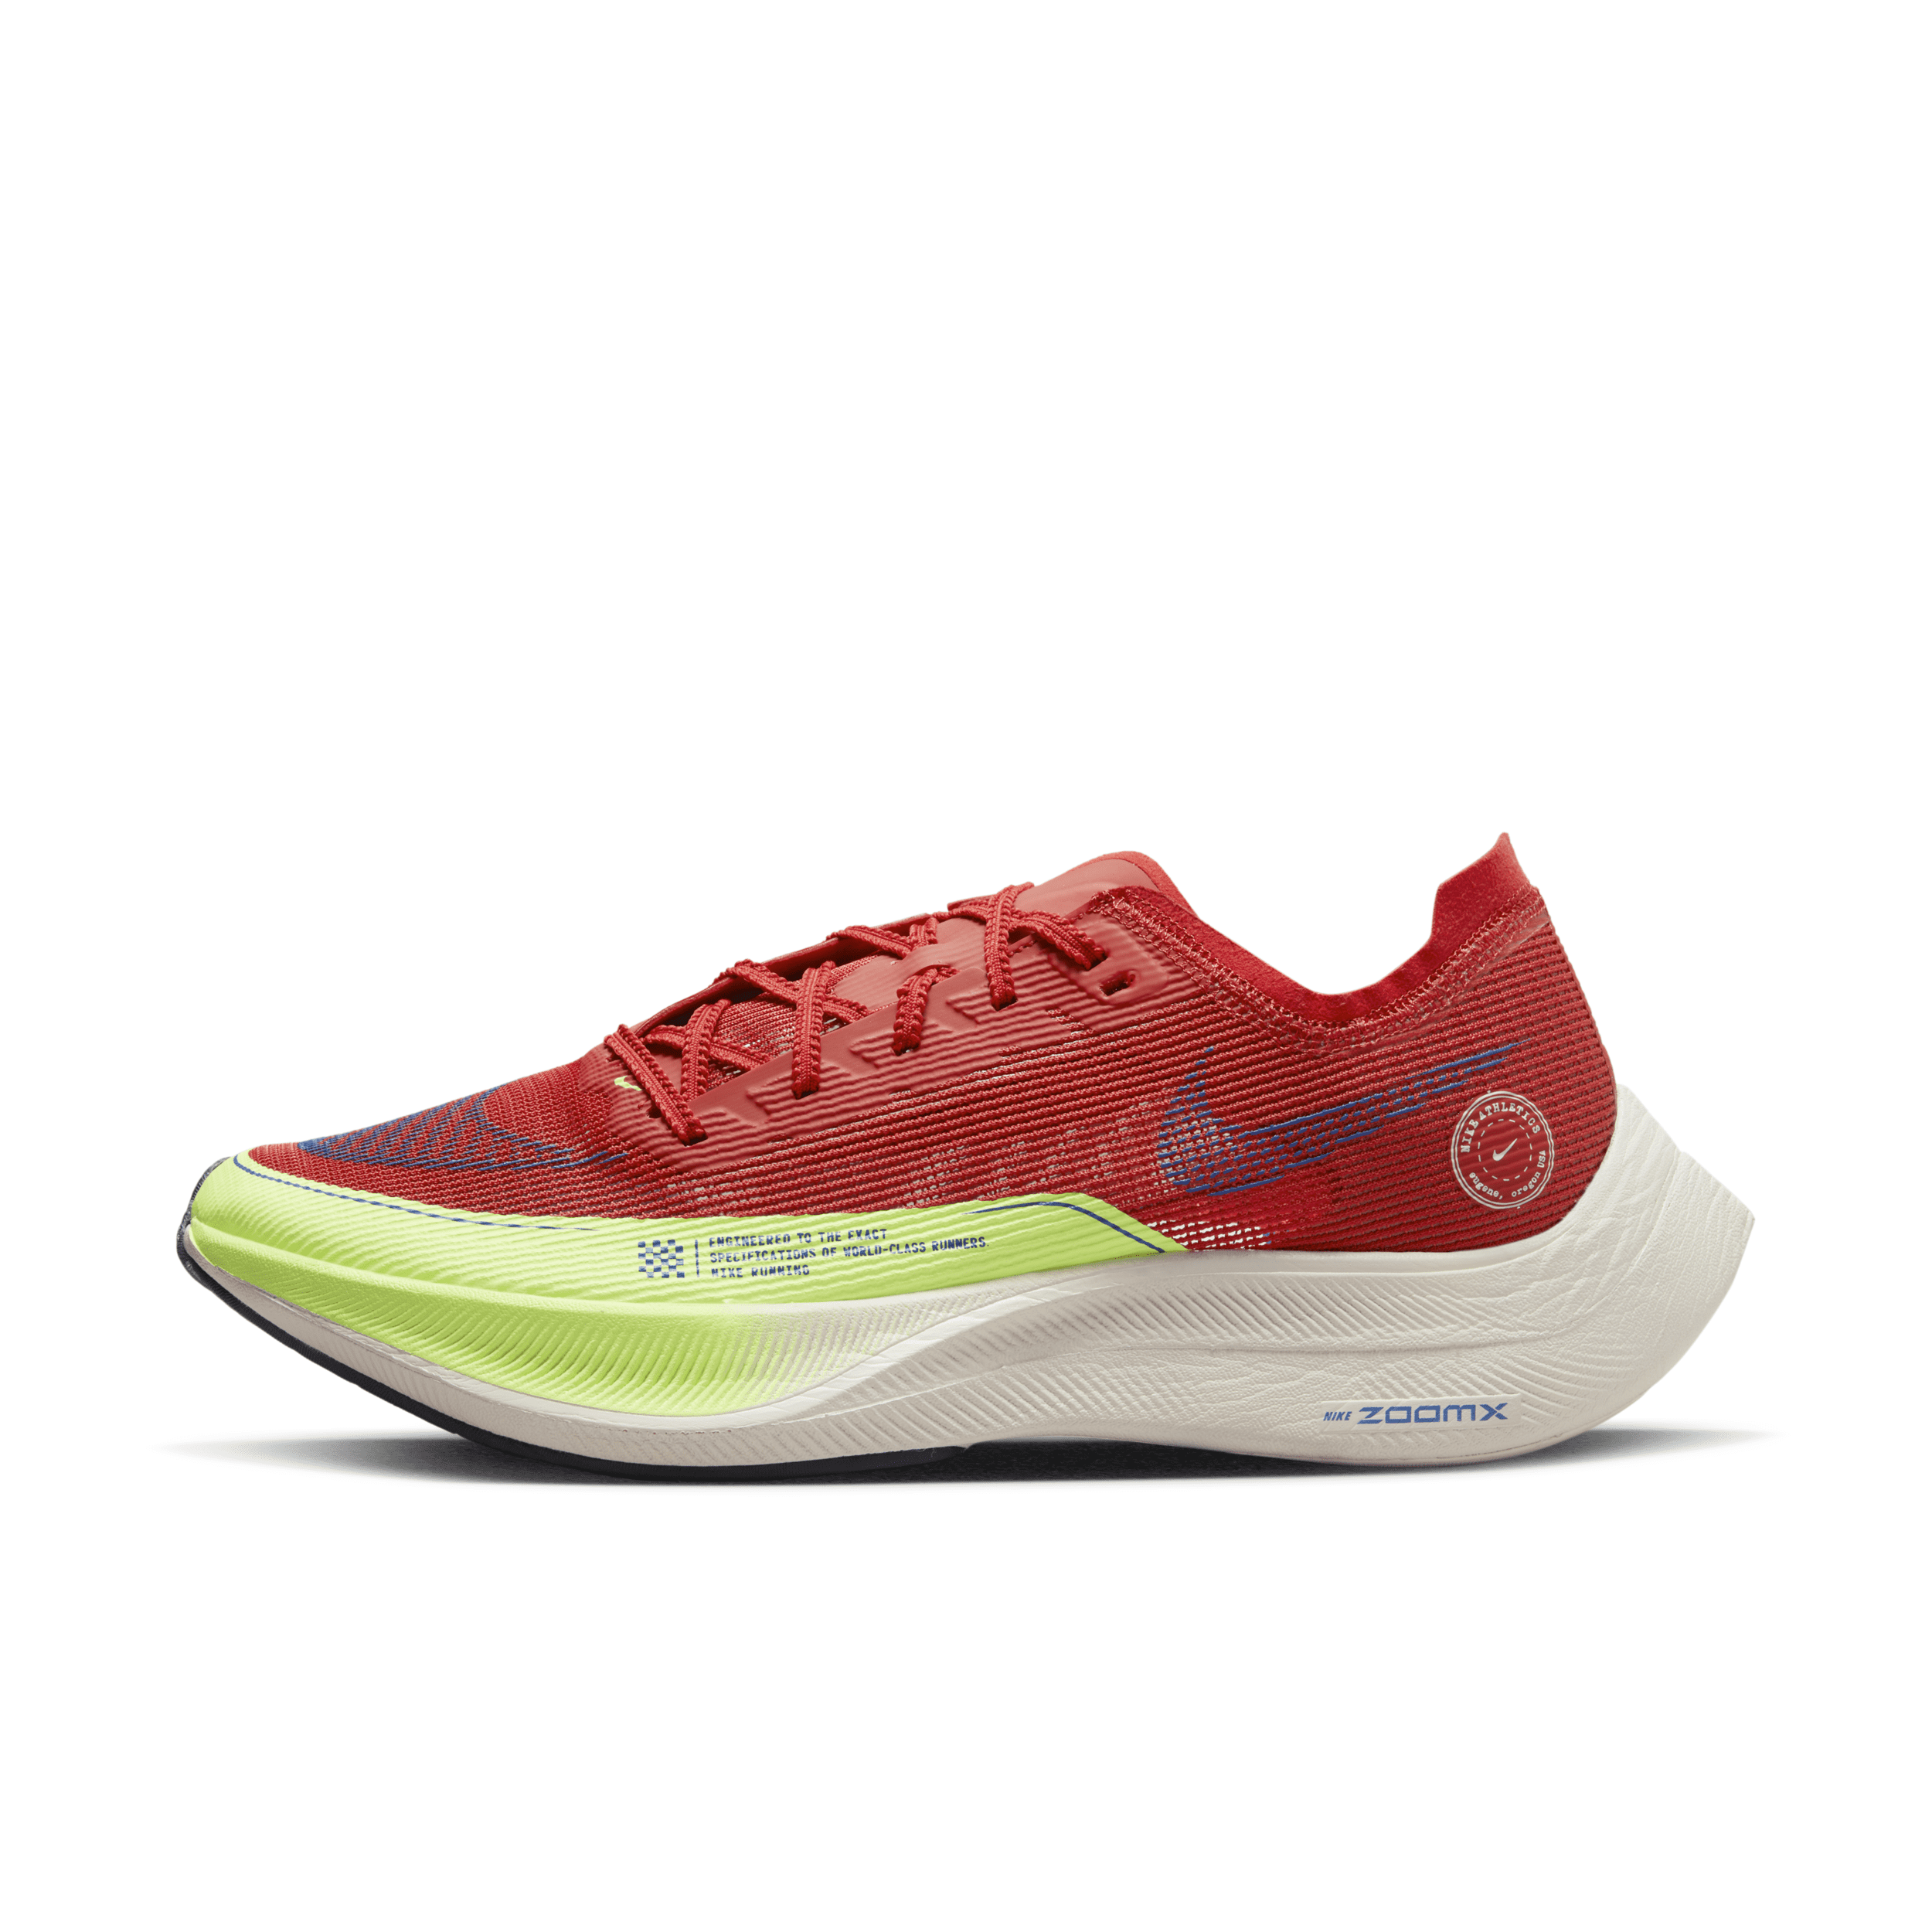 Continue the next evolution of speed with racing shoes made to help you chase new goals and records. The Nike Vaporfly 2 builds on a model loved by racers everywhere, with a redesigned upper that aims to improve comfort and breathability. From a 10K to a marathon, this updated model maintains the responsive cushioning and secure support of the original to help push you towards your personal best. Still the Best Energy Return Yet::Nike ZoomX foam delivers Nike Running's greatest energy return yet. A full-length carbon-fibre plate creates a responsive feel that helps keep you moving through your stride.,Soft & Ultra-Breathable::Redesigned upper features mesh fabric in areas where you need breathability for a softer, cooler design that contours to your foot.,Lace Up::Laces loop through lightweight side supports that eliminate the need for an arch band. This helps reduce the shoe's weight. More Reinforcement along the forefoot provides extra durability and secure comfort.Internal foam pod at the heel gives you extra cushioning.Light padding on the tongue helps reduce lace pressure at the top of your foot.Wider toe area helps give a roomier fit.Flexibility grooves on the sole give you multi-surface traction in a variety of weather conditions.